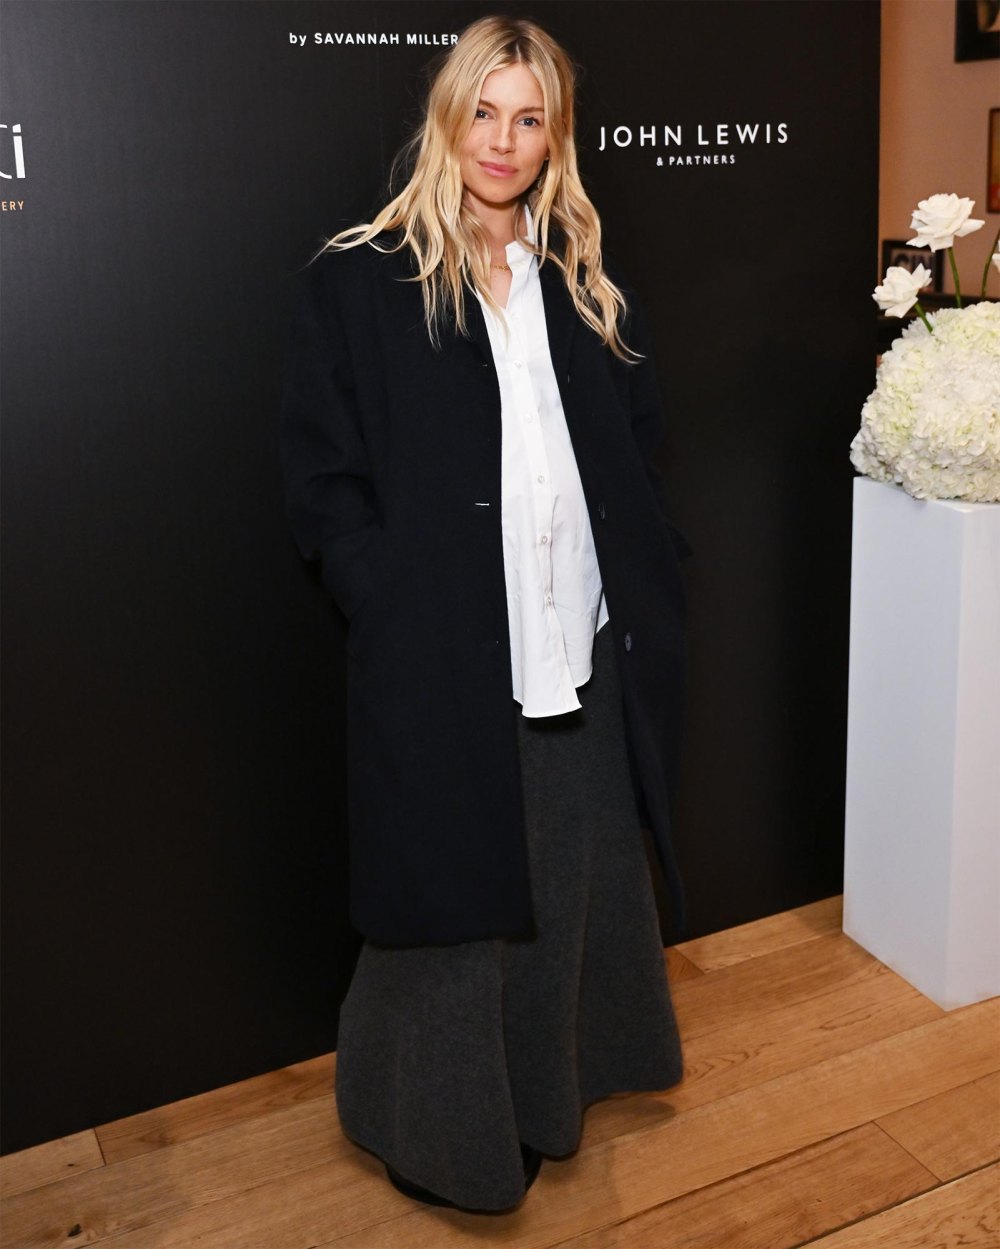 Sienna Miller Stylishly Conceals Baby Bump in Oversized Ensemble